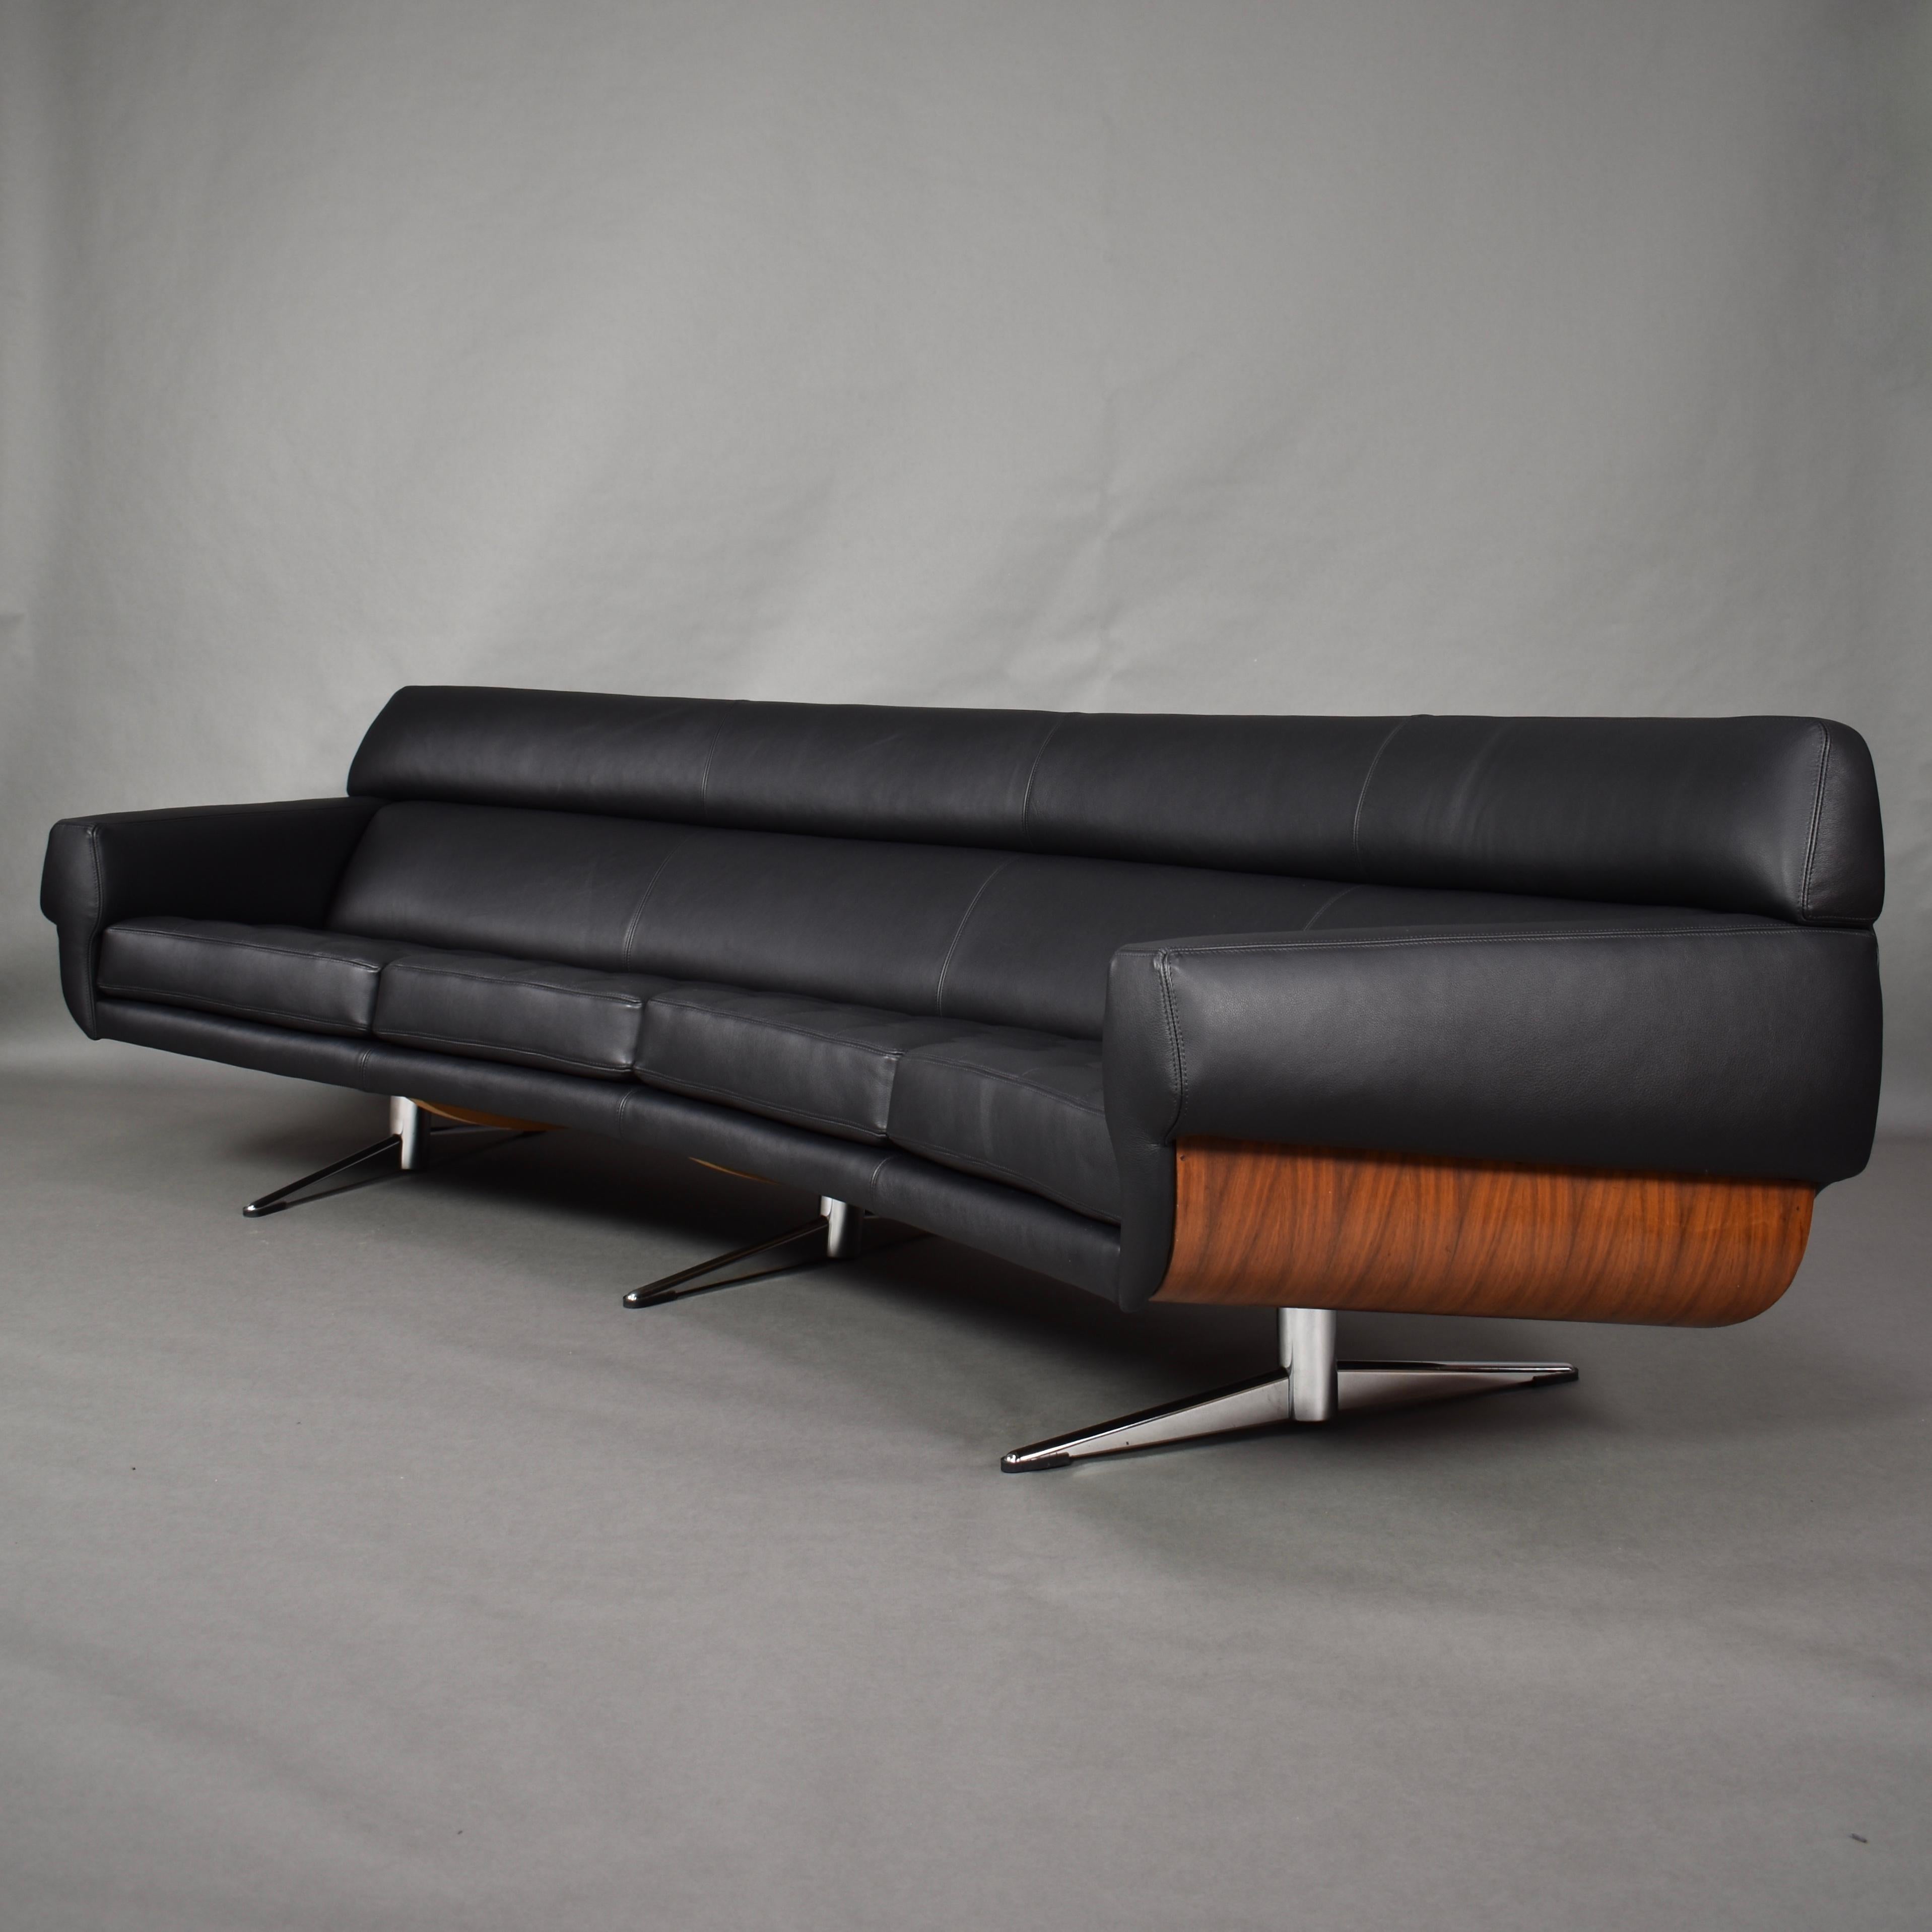 Extraordinary curved sofa by Martin Stoll, Germany, circa 1960.

This is a very rare sofa and a real showpiece!!
The sides feature beautiful walnut bent plywood in the manor of Charles and Ray Eames' lounge chair.
The sofa has been stripped to